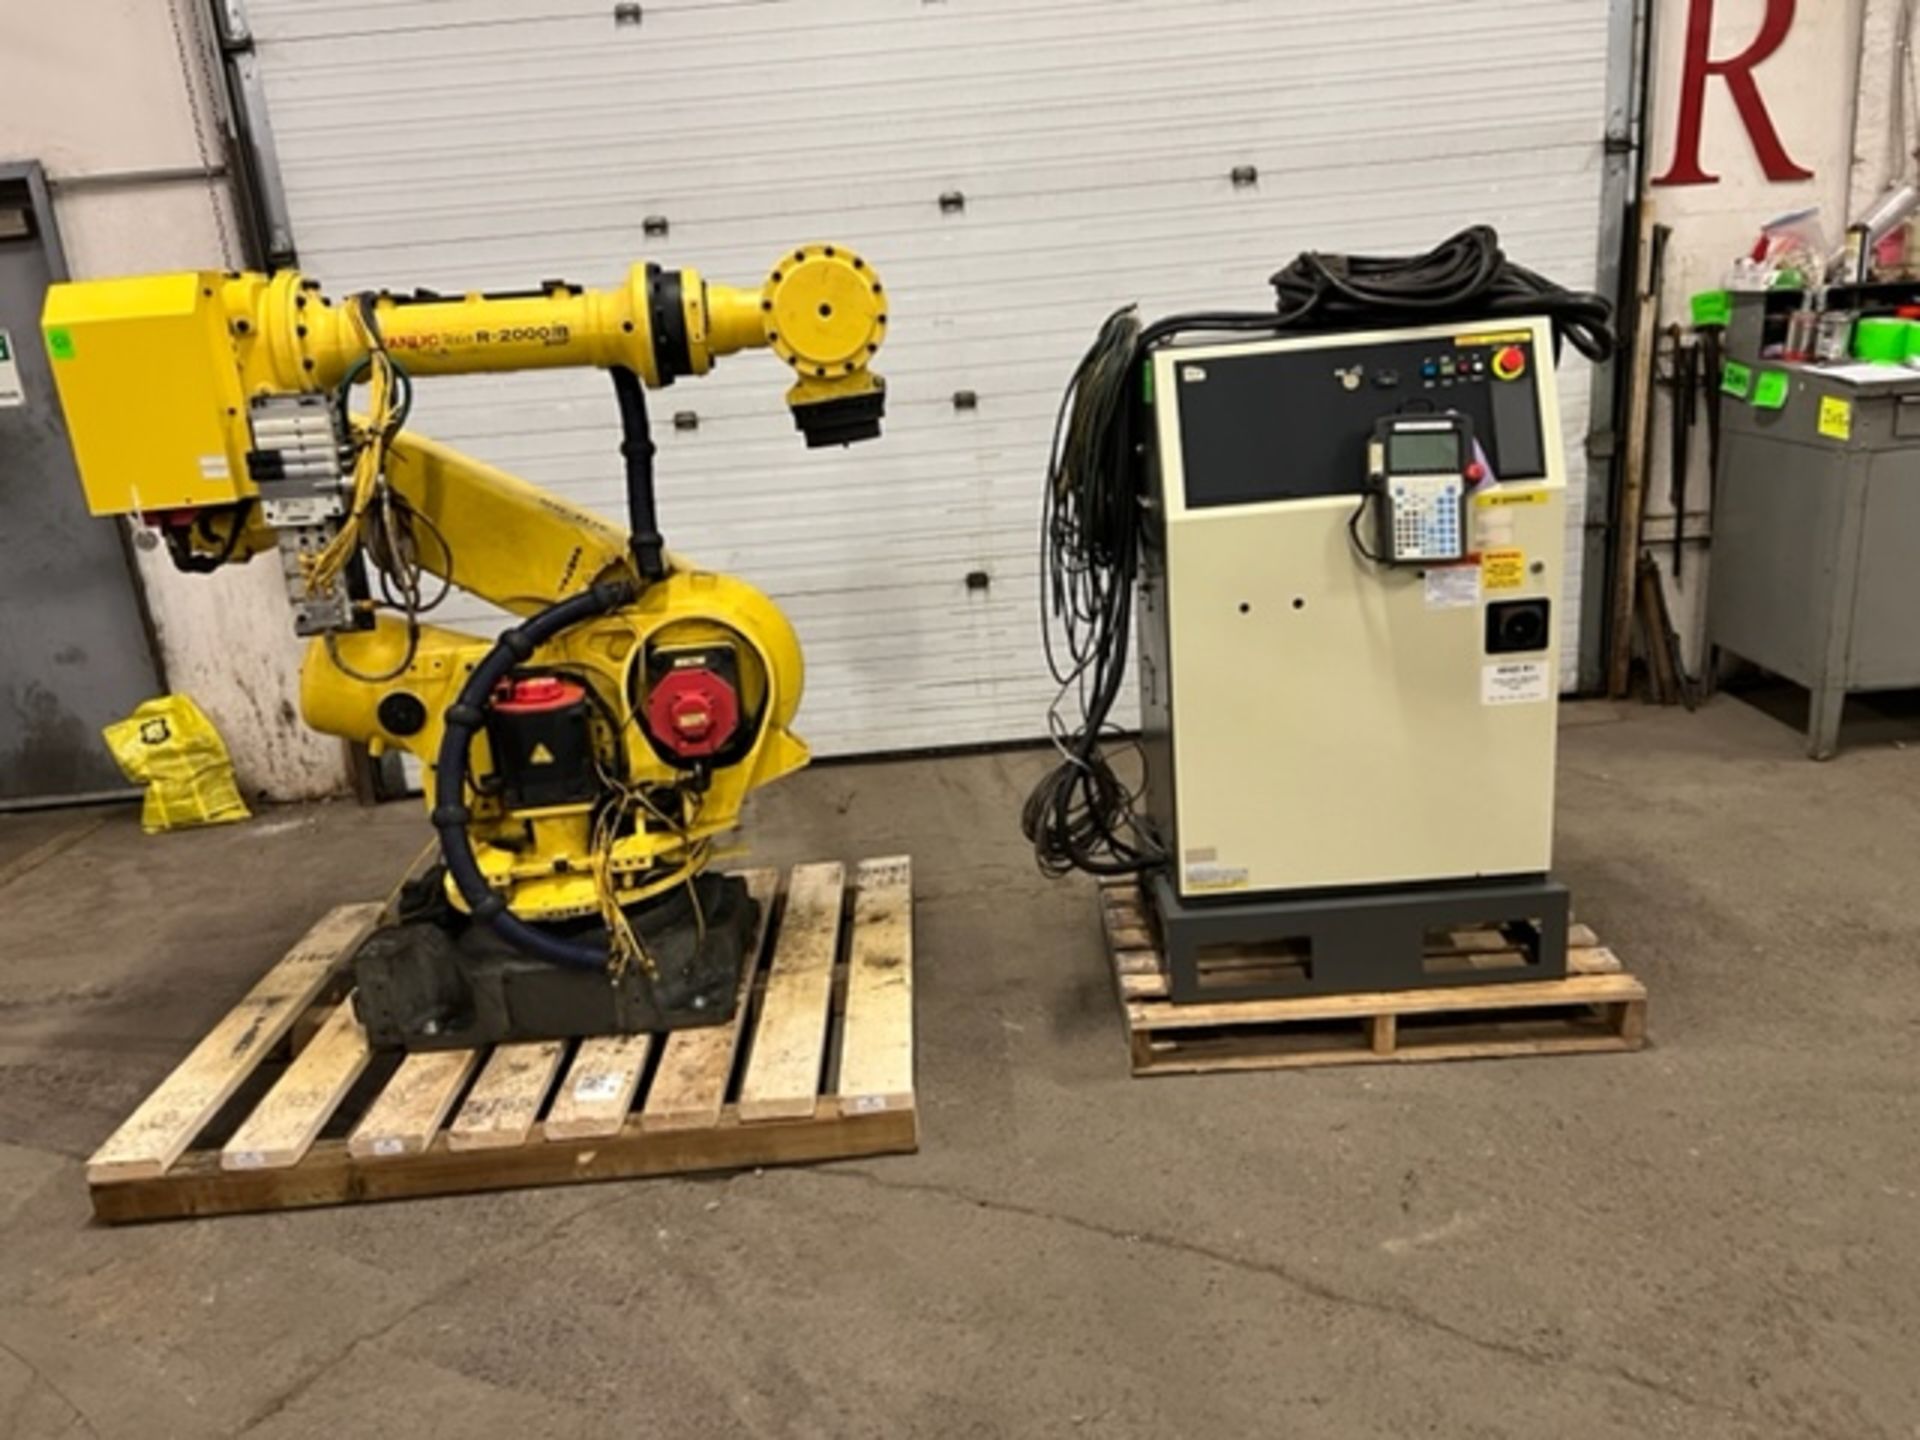 MINT 2012 Fanuc Handling Robot Model R-2000iB 210F - 210kg payload with R-30iA Controller and